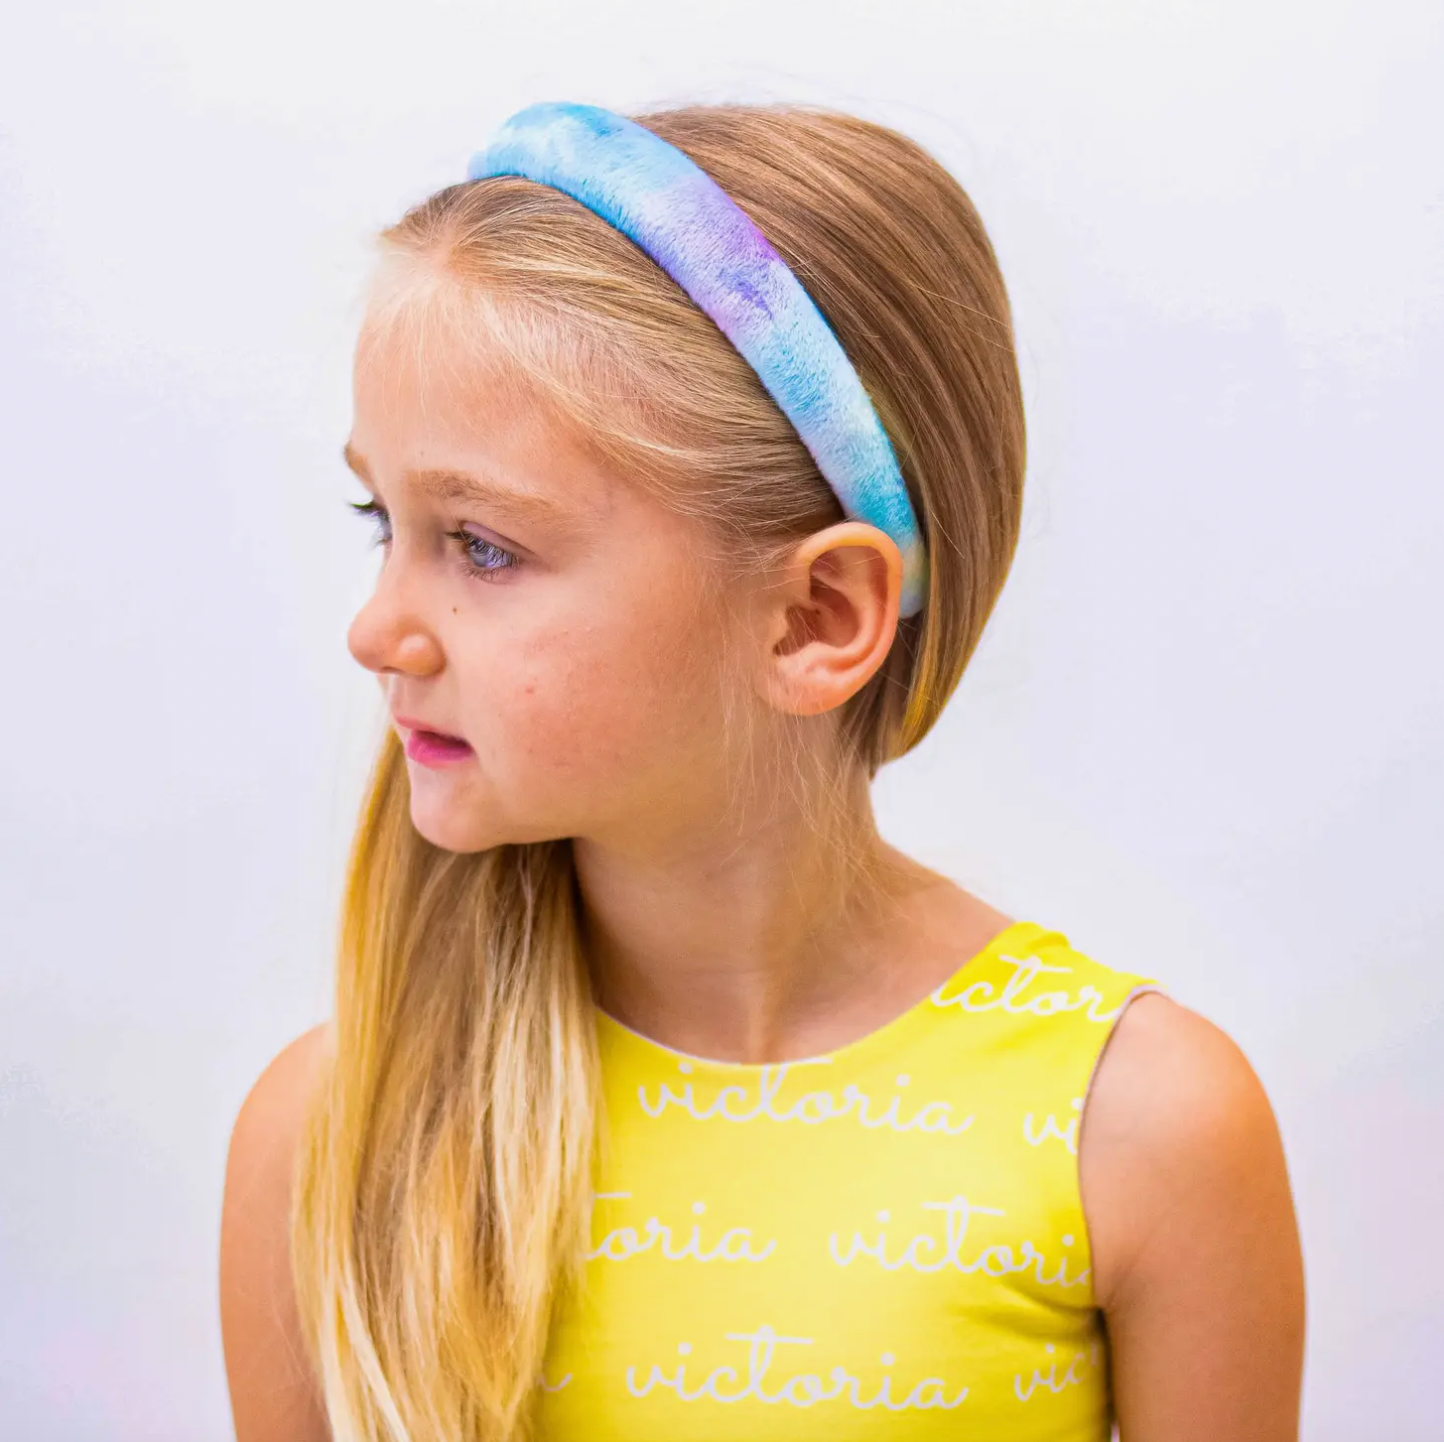 Soft Padded Tie-Dye Headband, 2 colors - Magpies Paducah